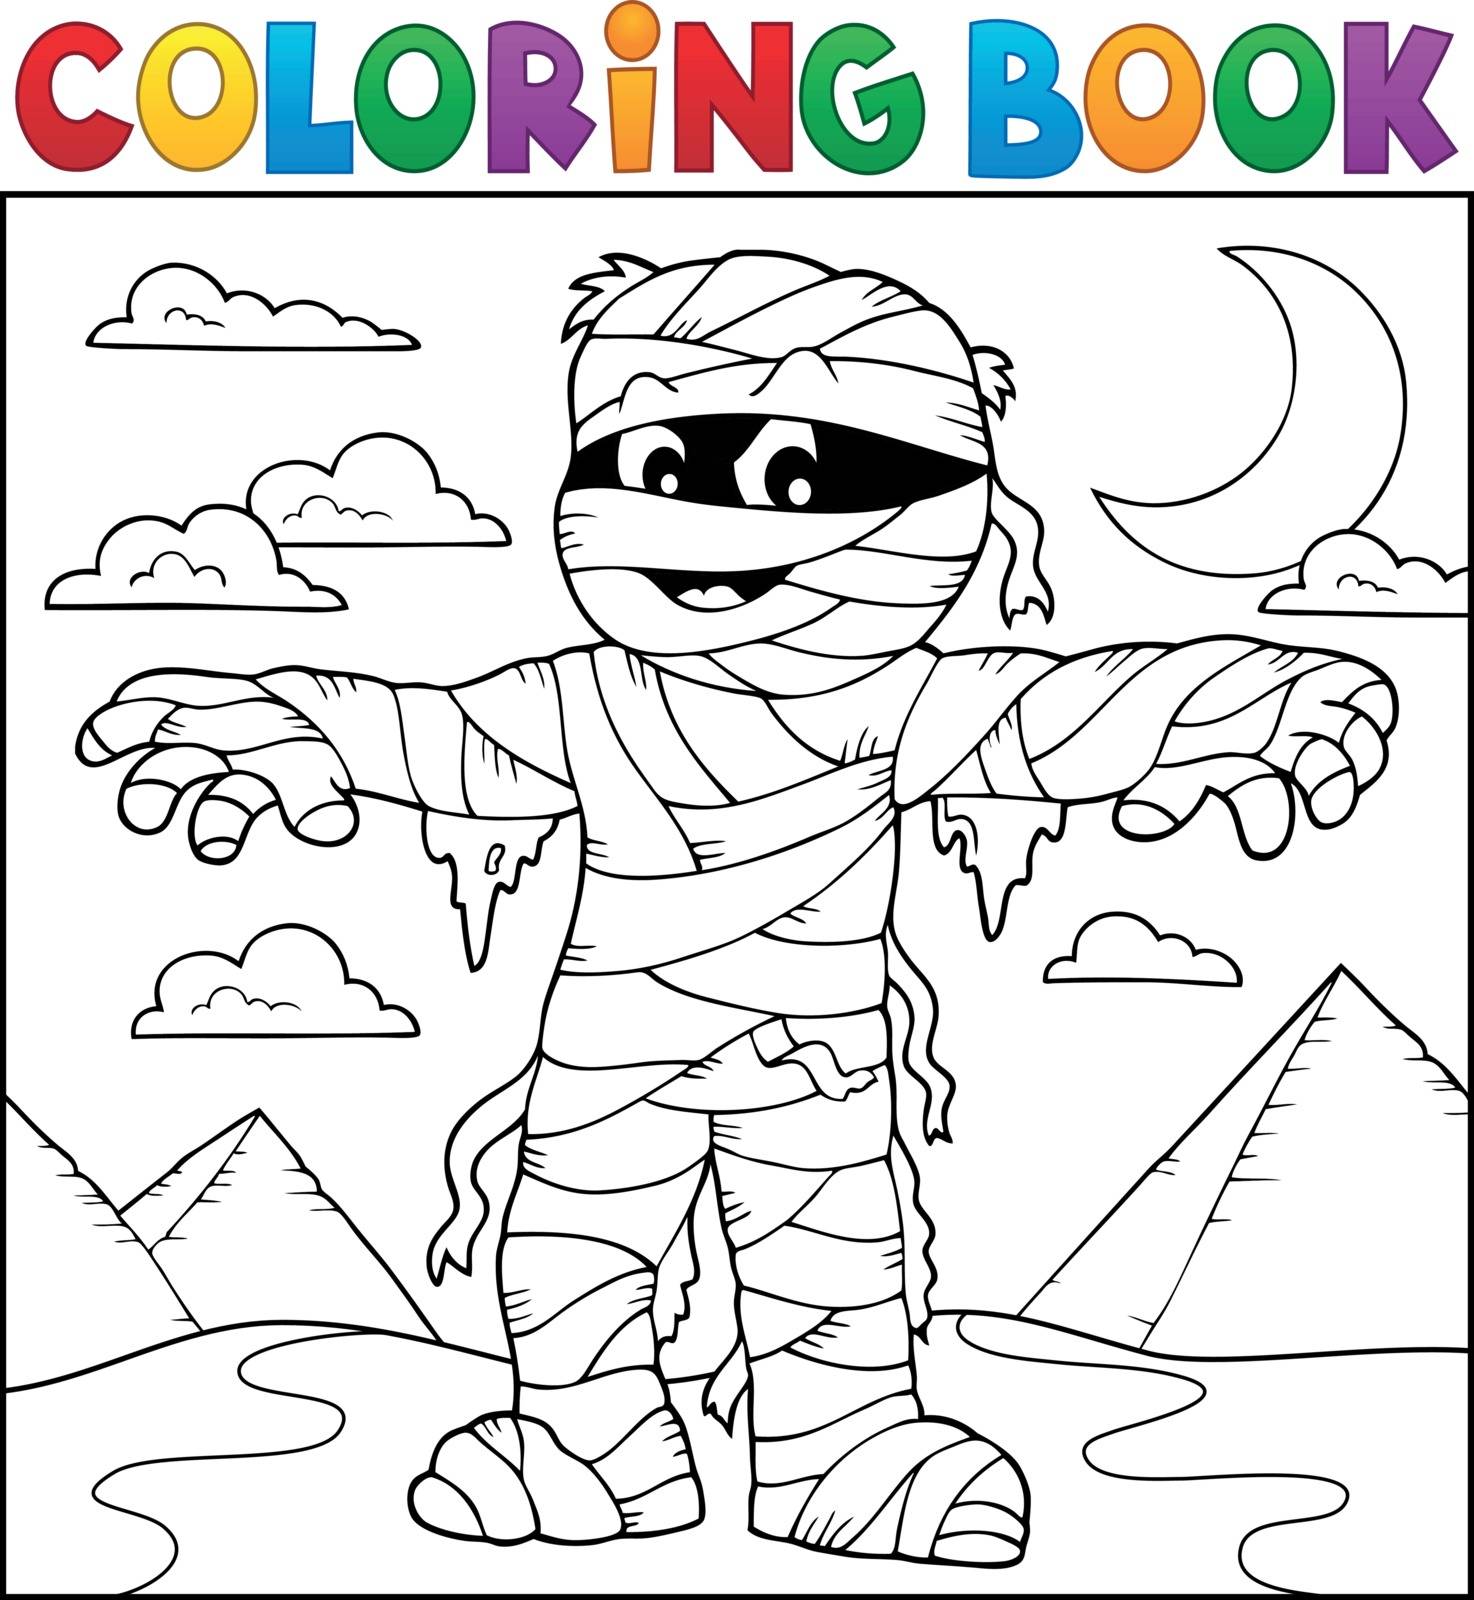 Coloring book mummy theme 2 by clairev